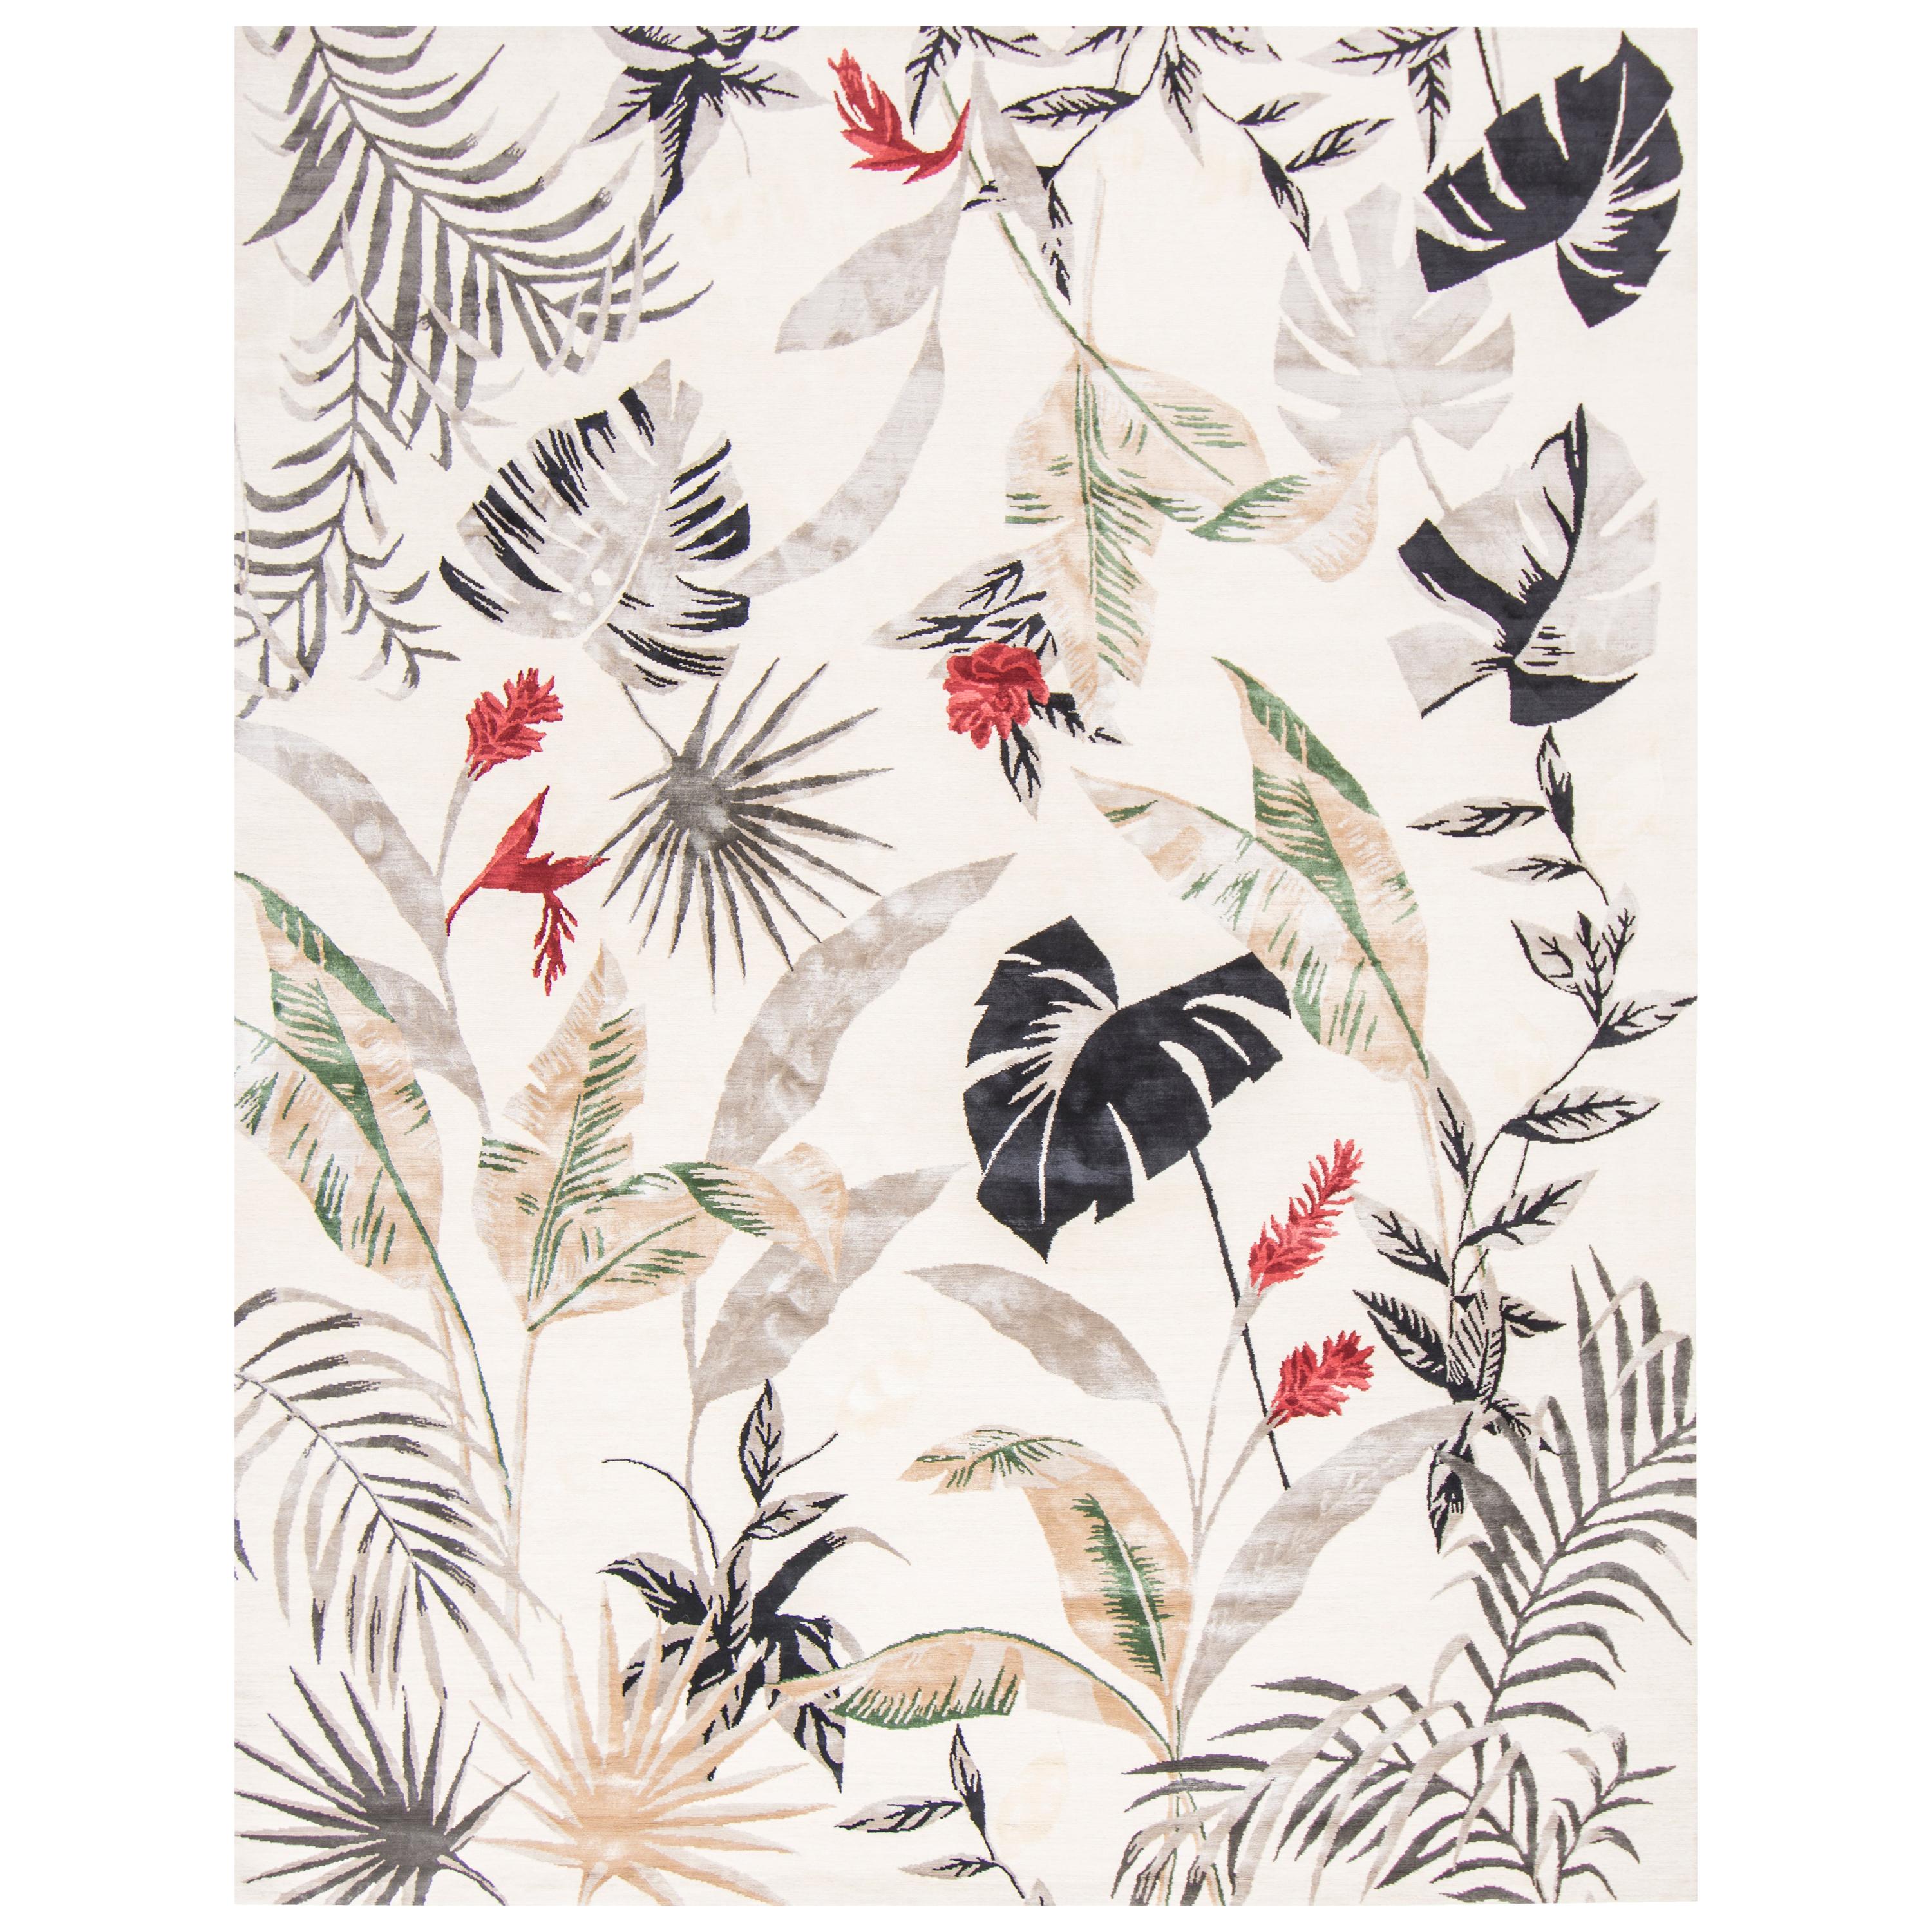 Mehraban Fearful Symmetry Rug by Liesel Plambeck For Sale